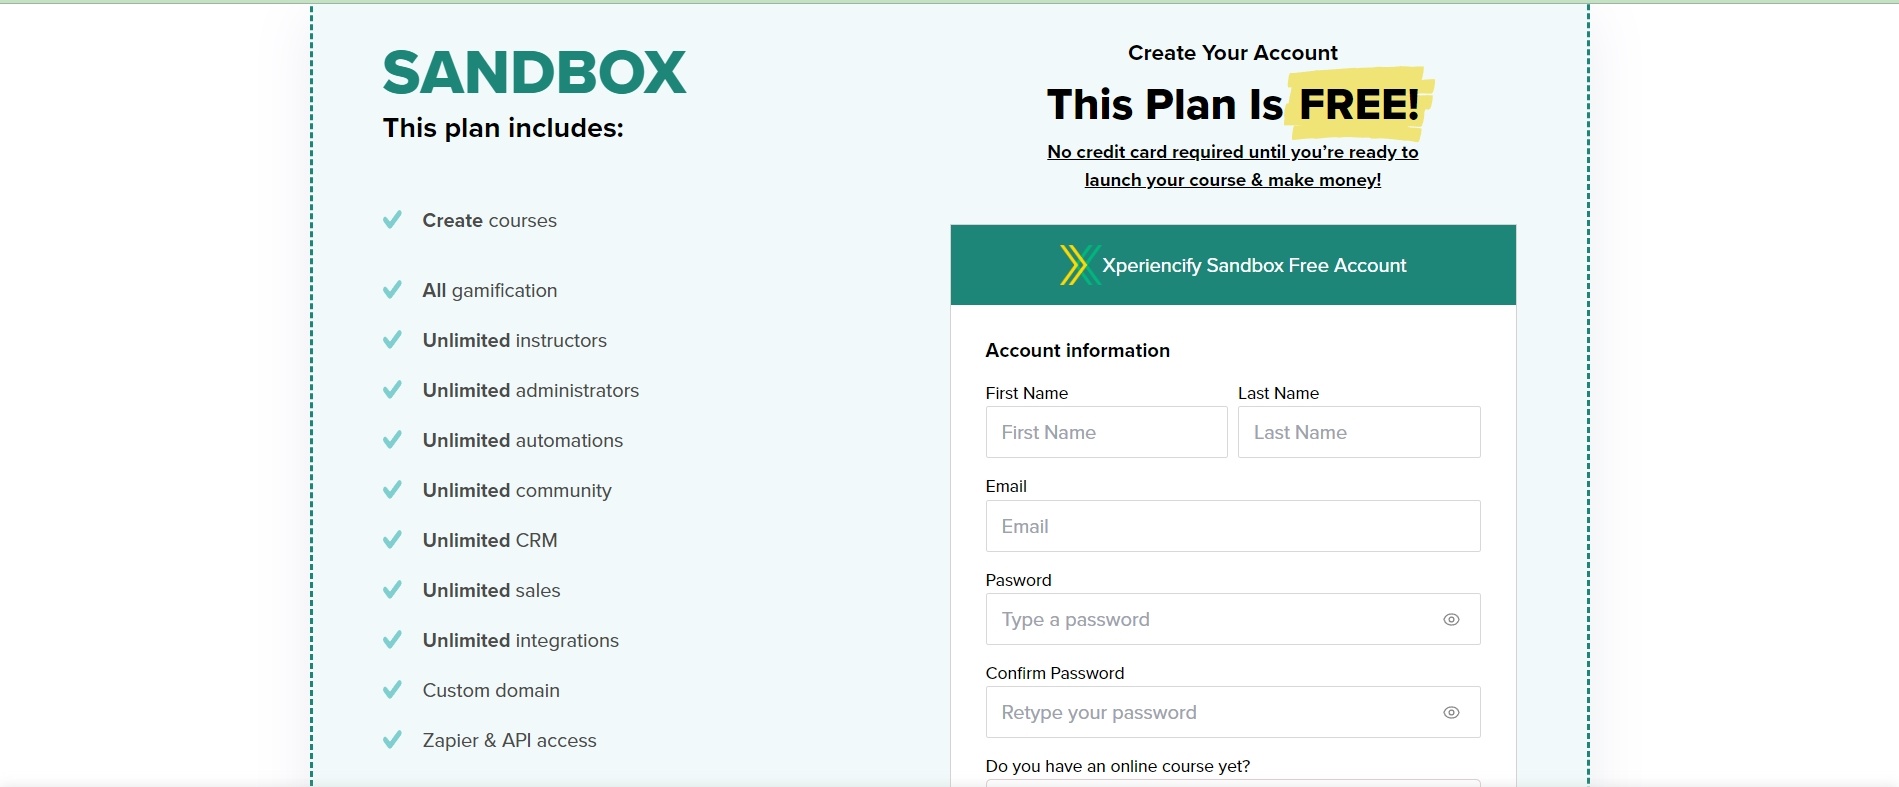 Xperiencify invite visitors to register their email for their free sandbox plan